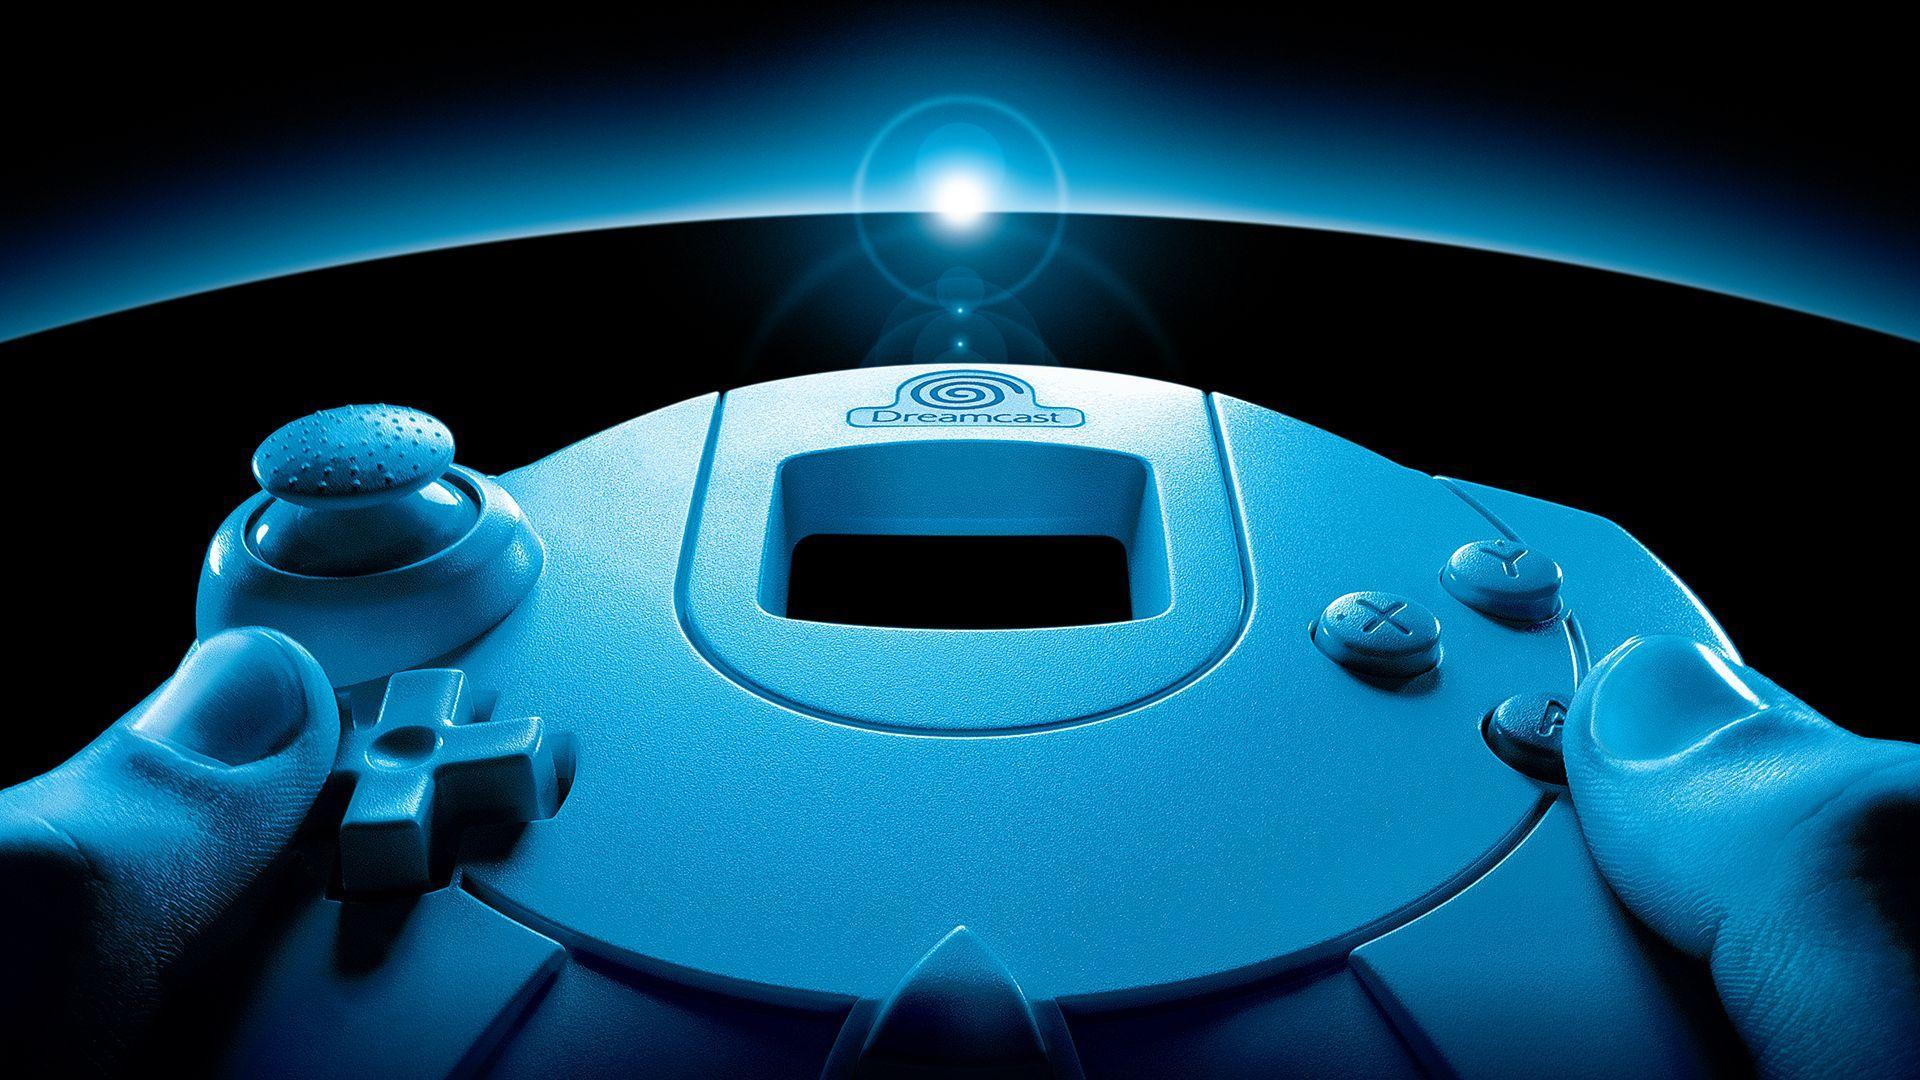 Dreamcast Wallpapers - Top Free Dreamcast Backgrounds - WallpaperAccess